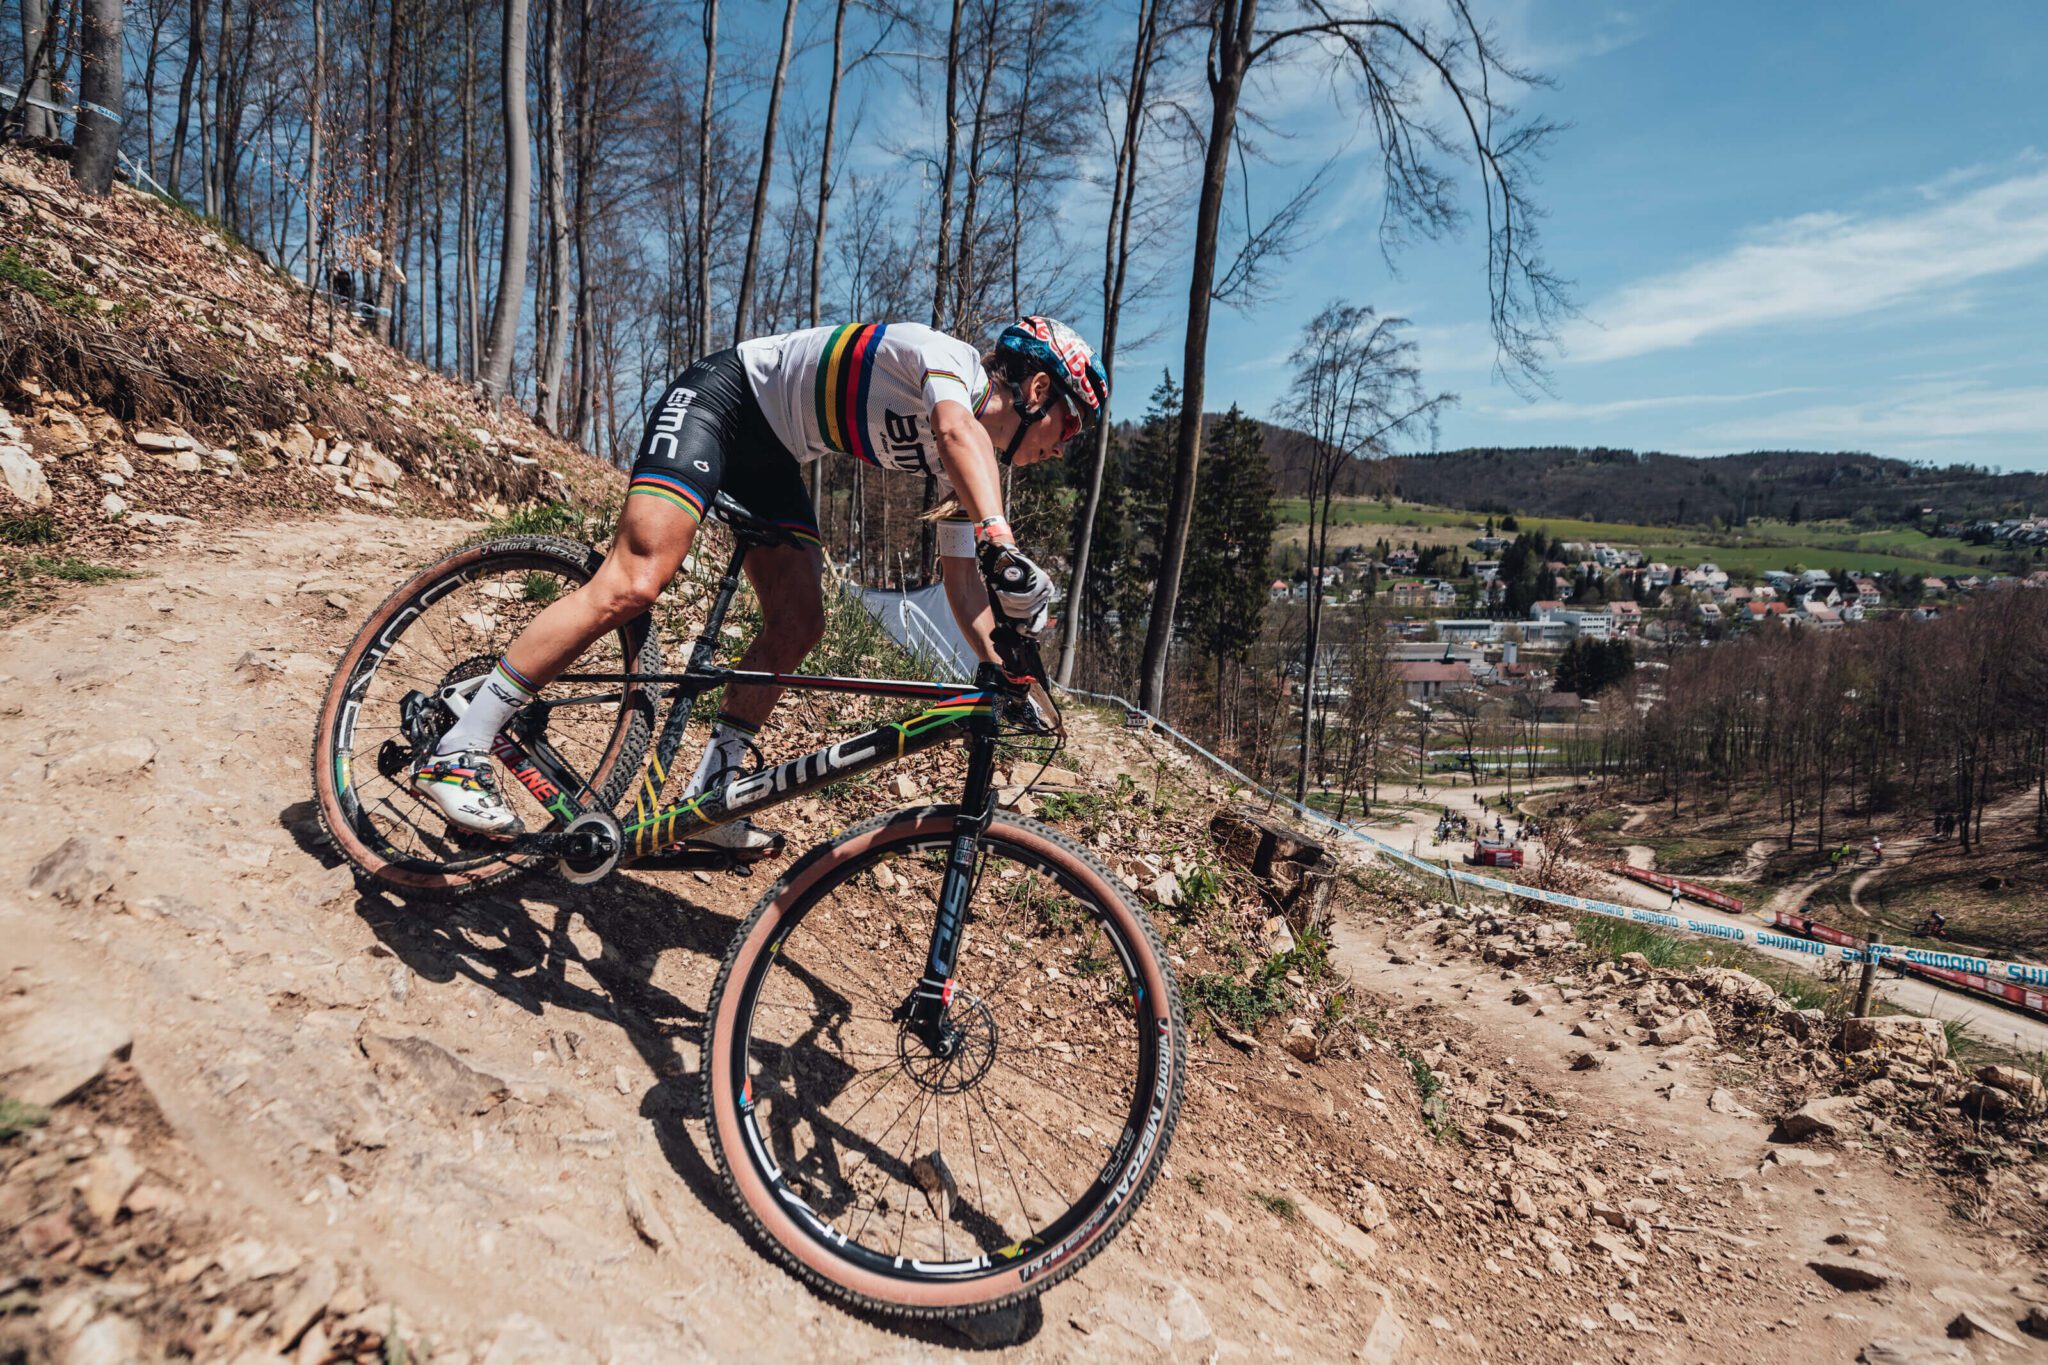 XC World Cup Albstadt Germany 6-8 May – What To Expect